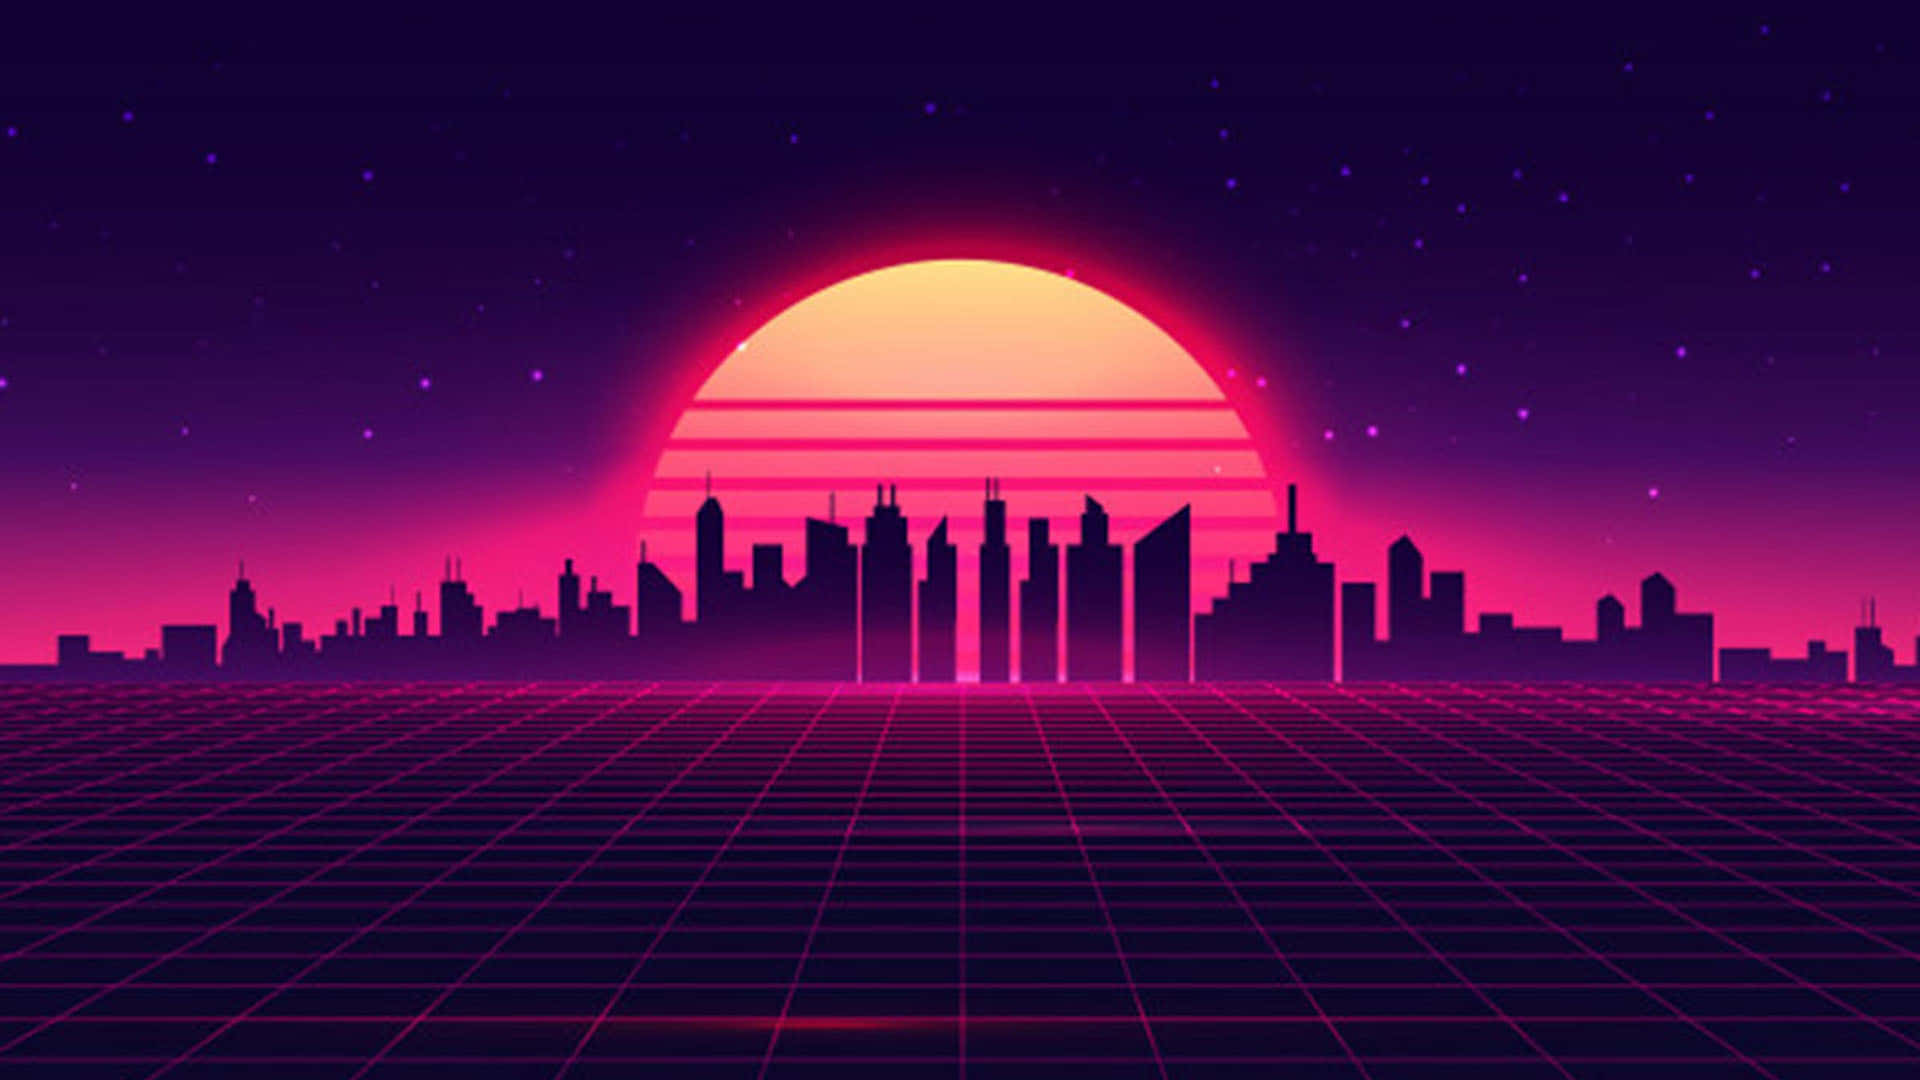 Retro City With Pink Moon Wallpaper